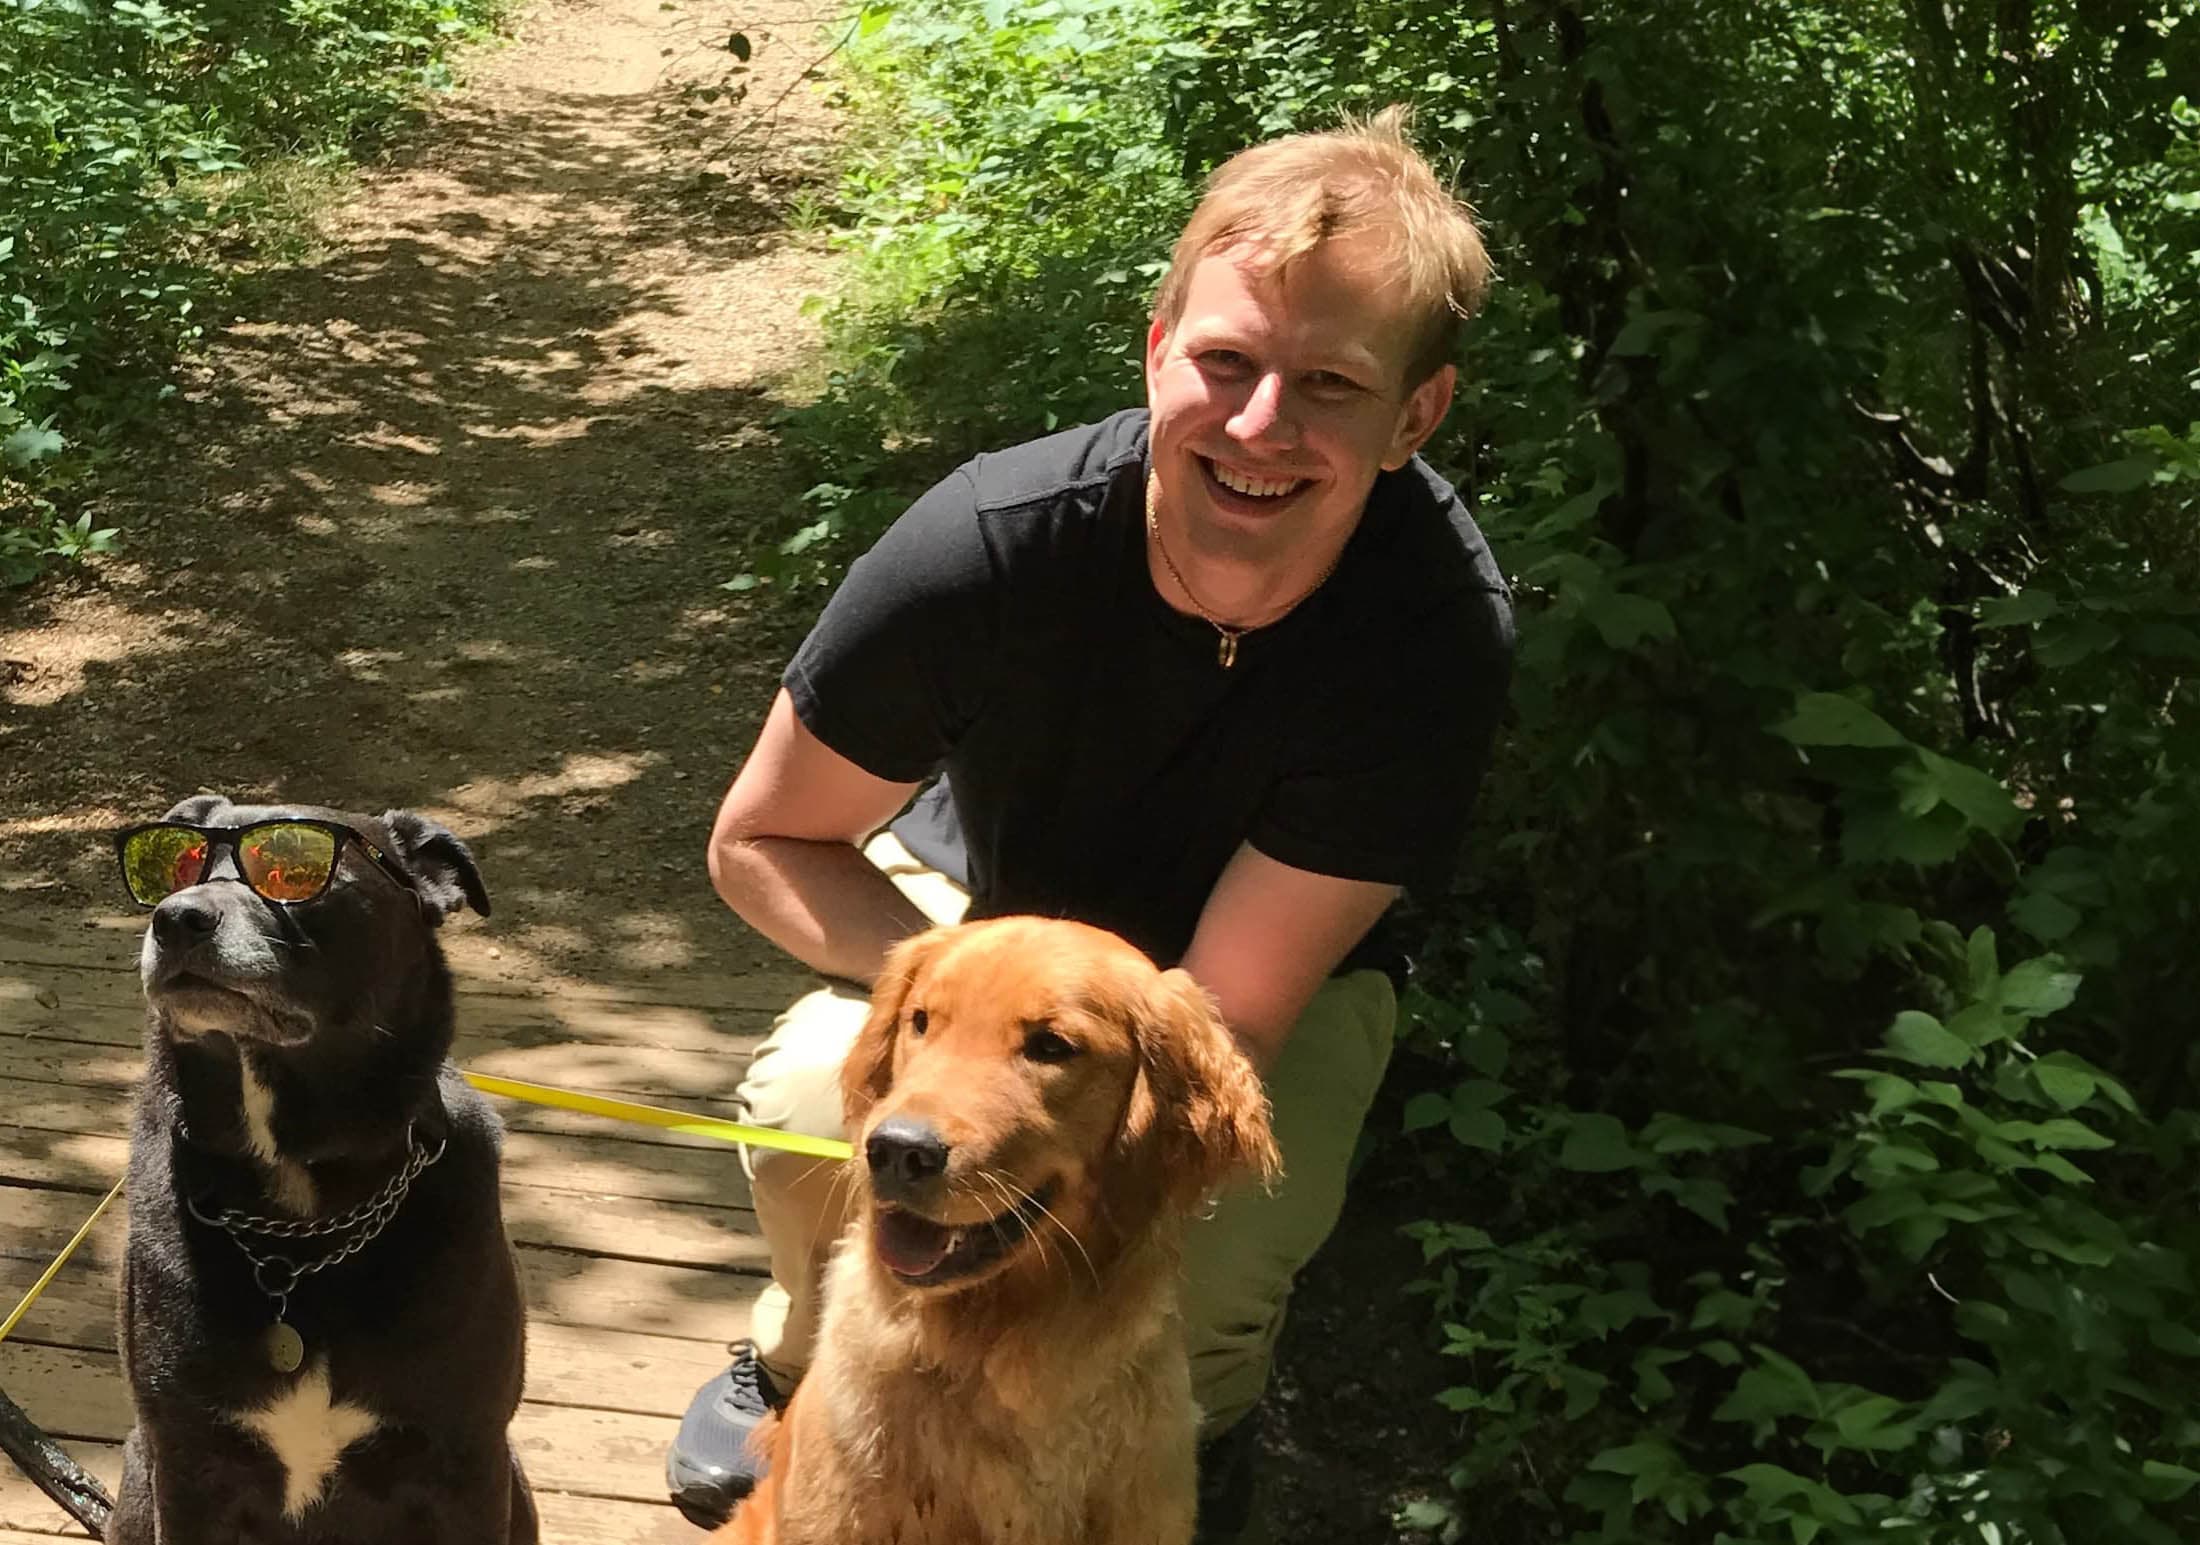 Juliusz Kruszelnicki with a black lab and a golden retriever on a wooden bridge on a hike